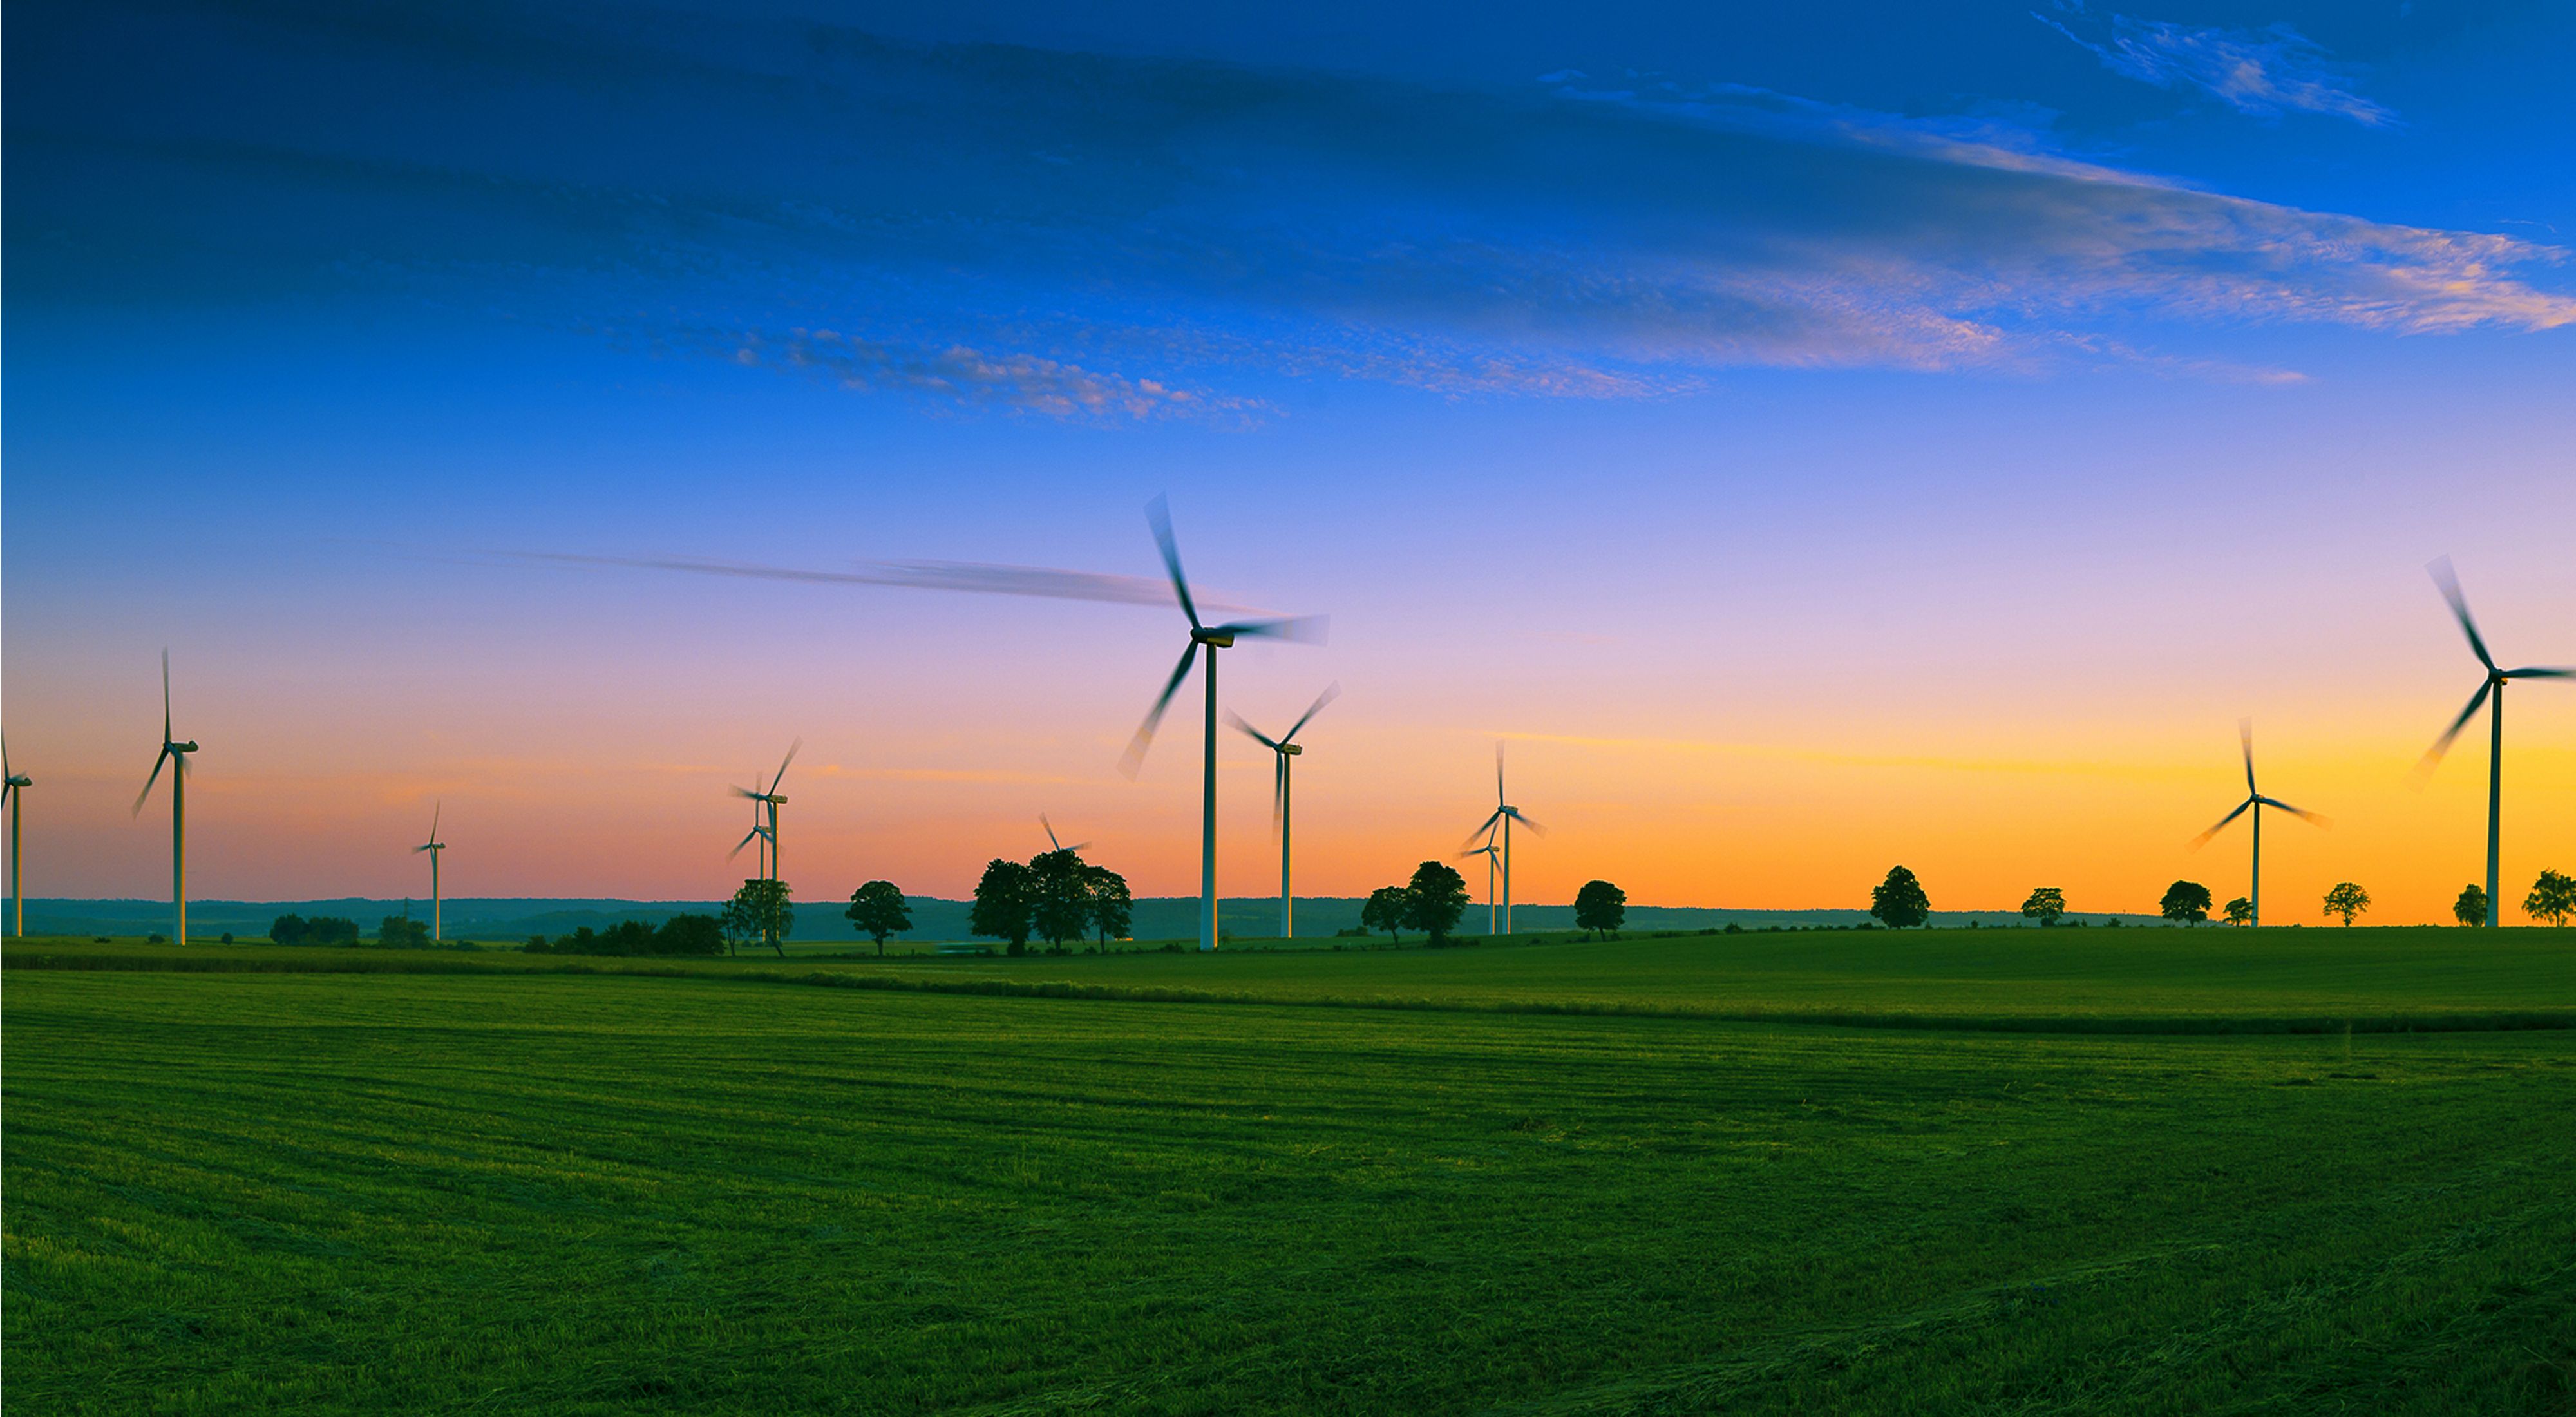 wind turbines in a field against a sunset sky.